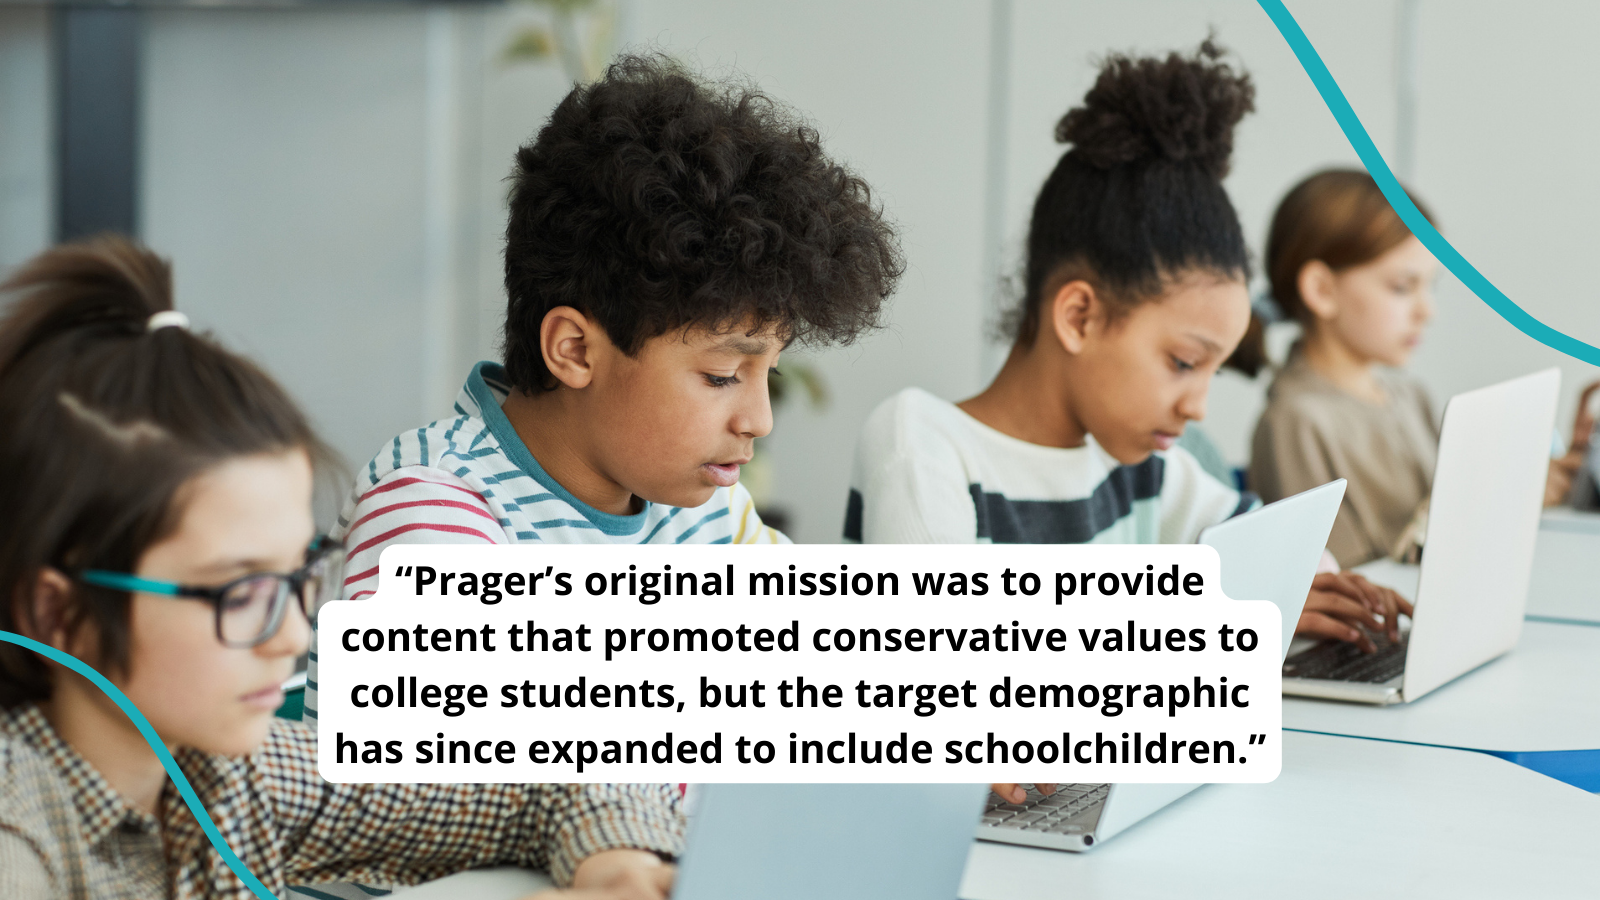 Photo of children using computers with quote about PragerU's educational resources